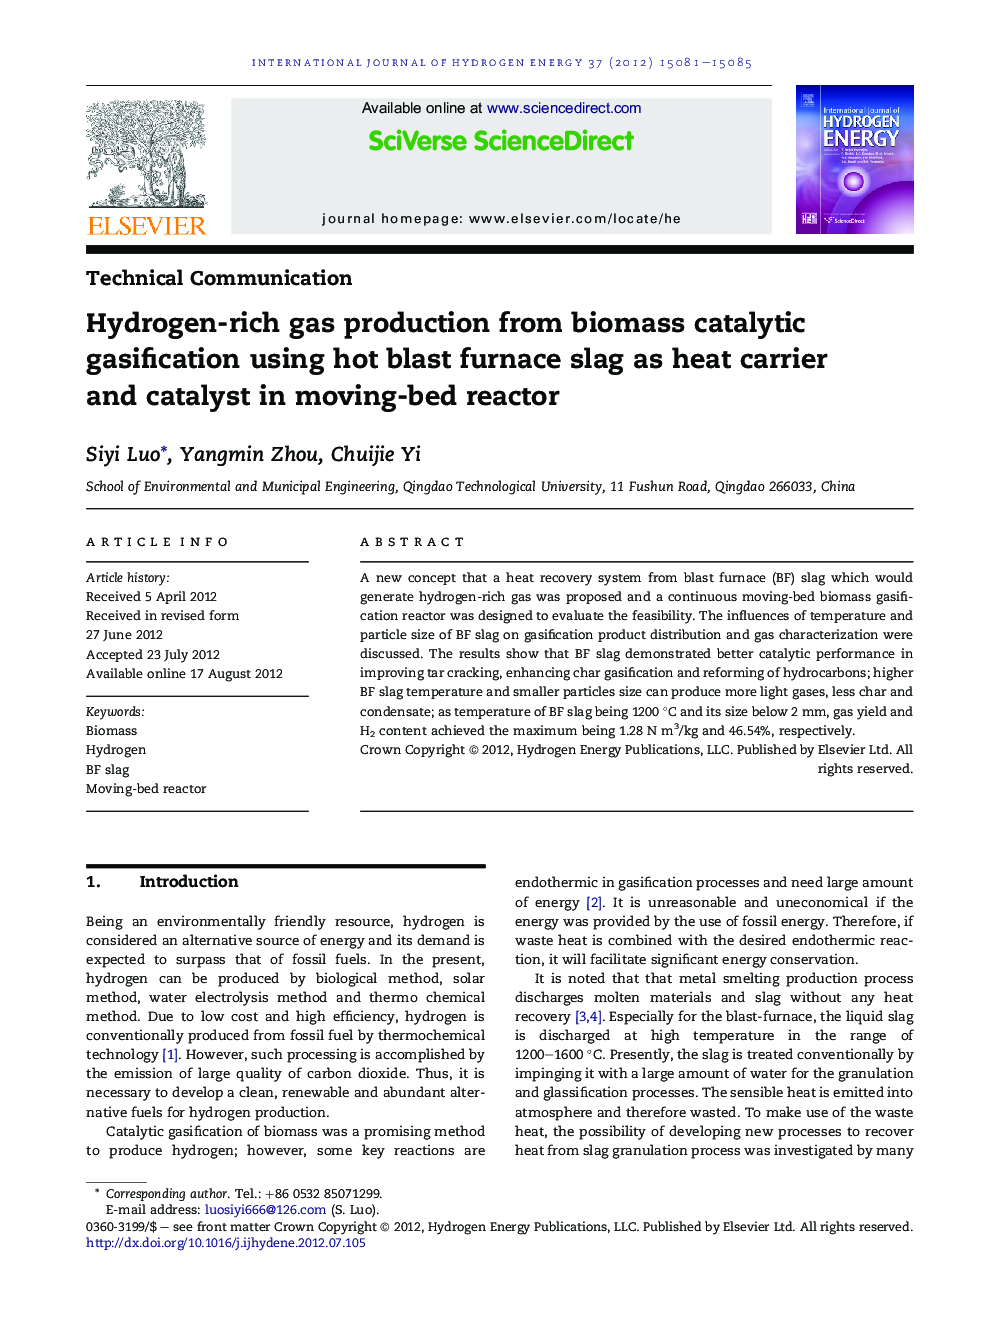 Hydrogen-rich gas production from biomass catalytic gasification using hot blast furnace slag as heat carrier and catalyst in moving-bed reactor